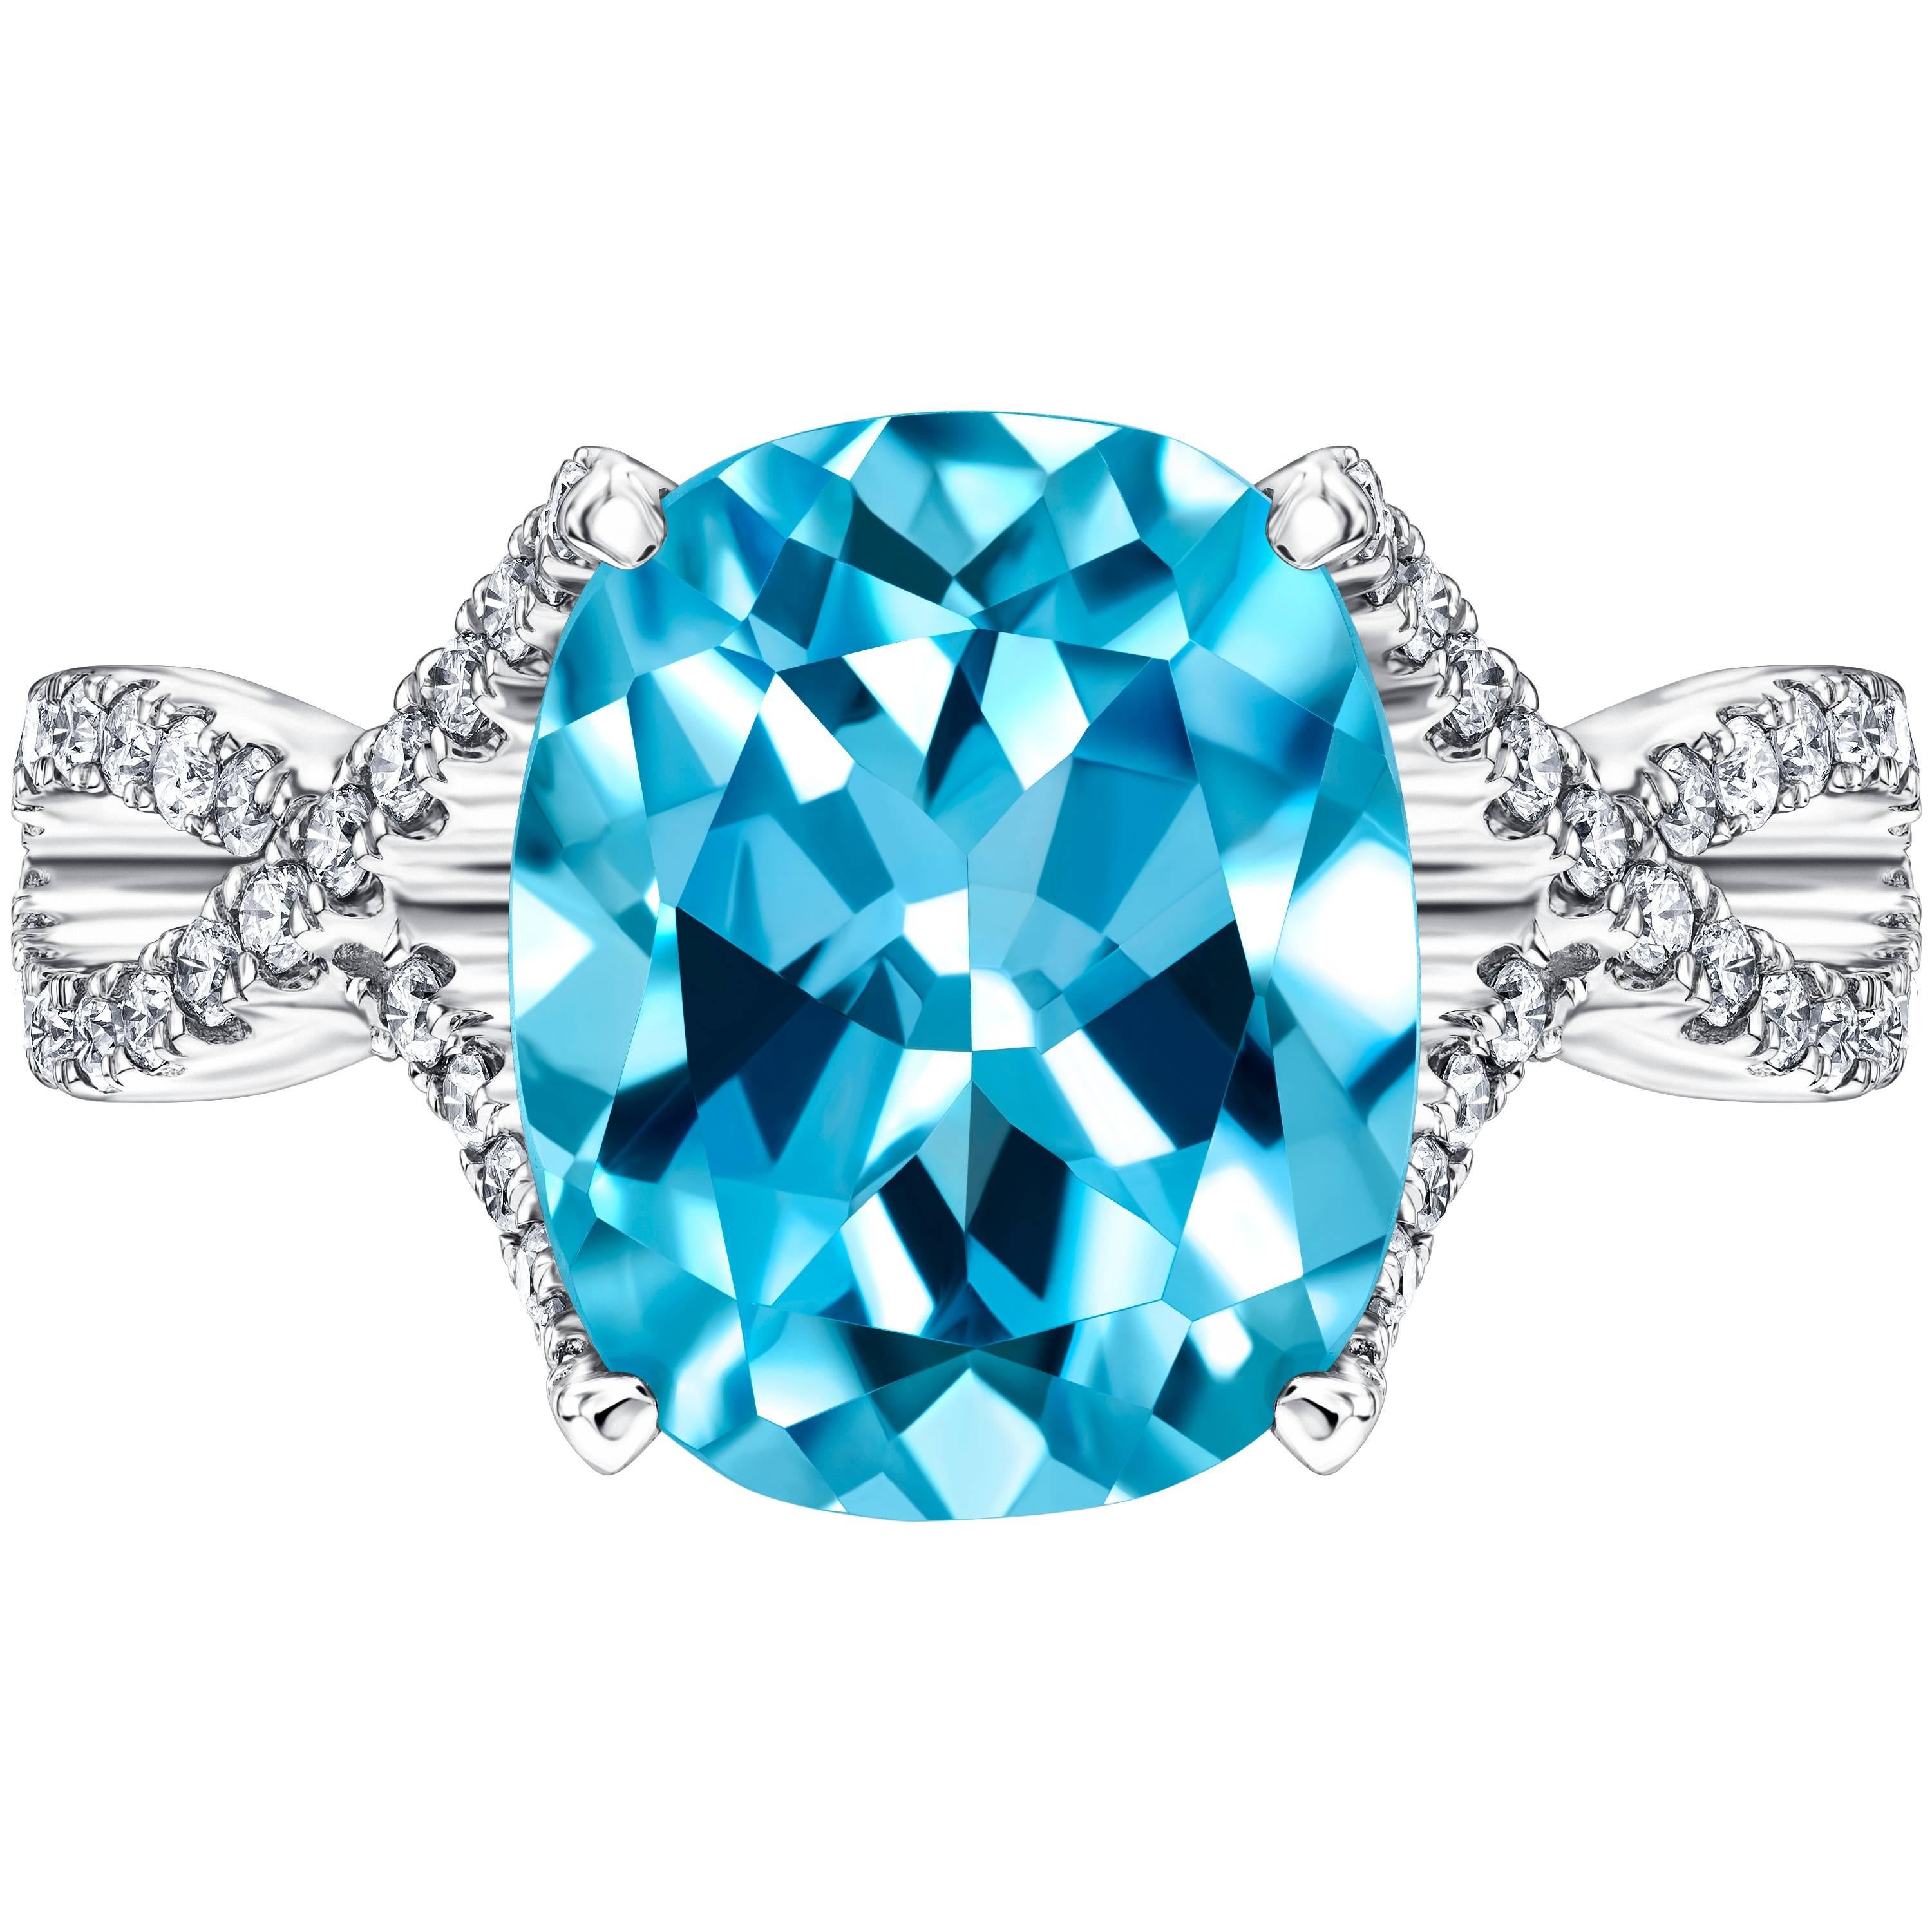 This Stunning 5.50ct Cushion Cut Blue Topaz Engagement Ring set in 18ct White Gold with Four Claws. Featuring an intertwined Ring Shank set with 0.66ct H-SI Pave set Diamonds. This Ring has a total weight of 6.16 carats. With a quality grading of